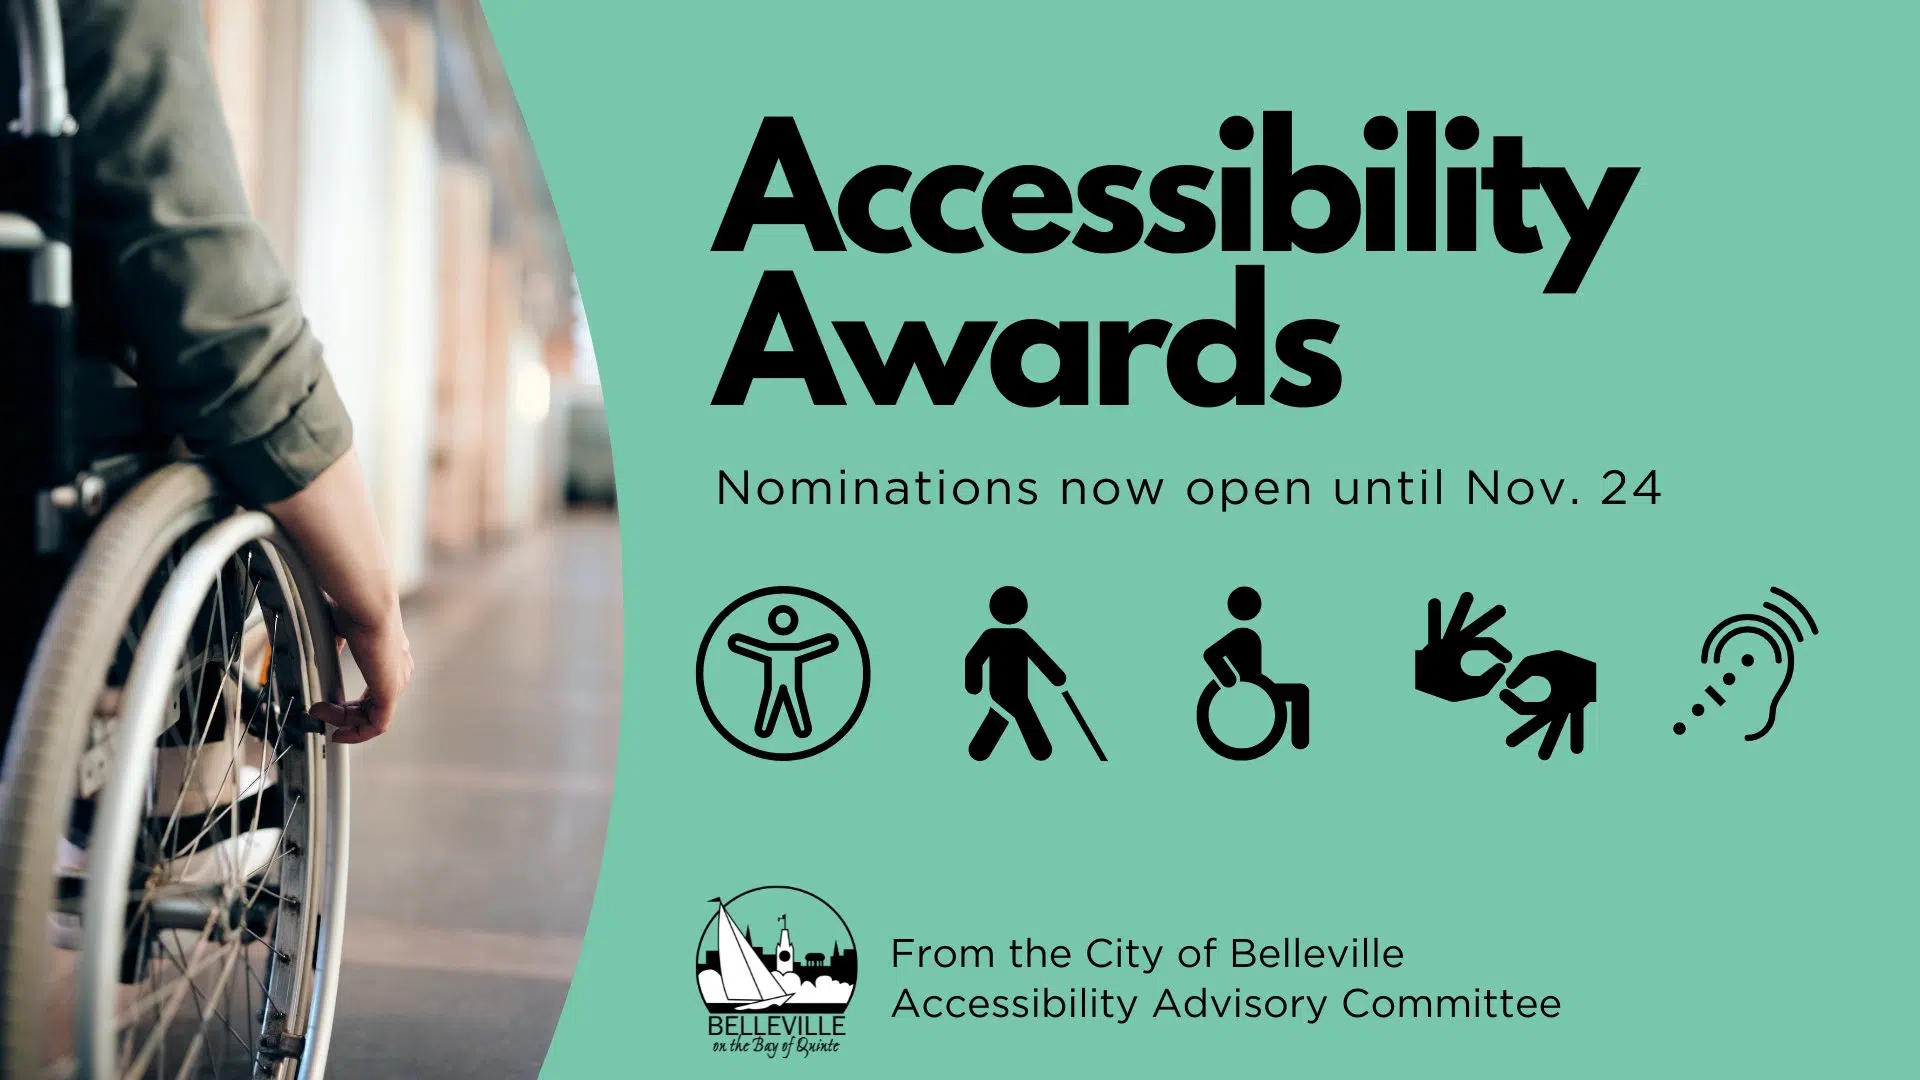 Nominations now open for Accessibility Excellence Awards